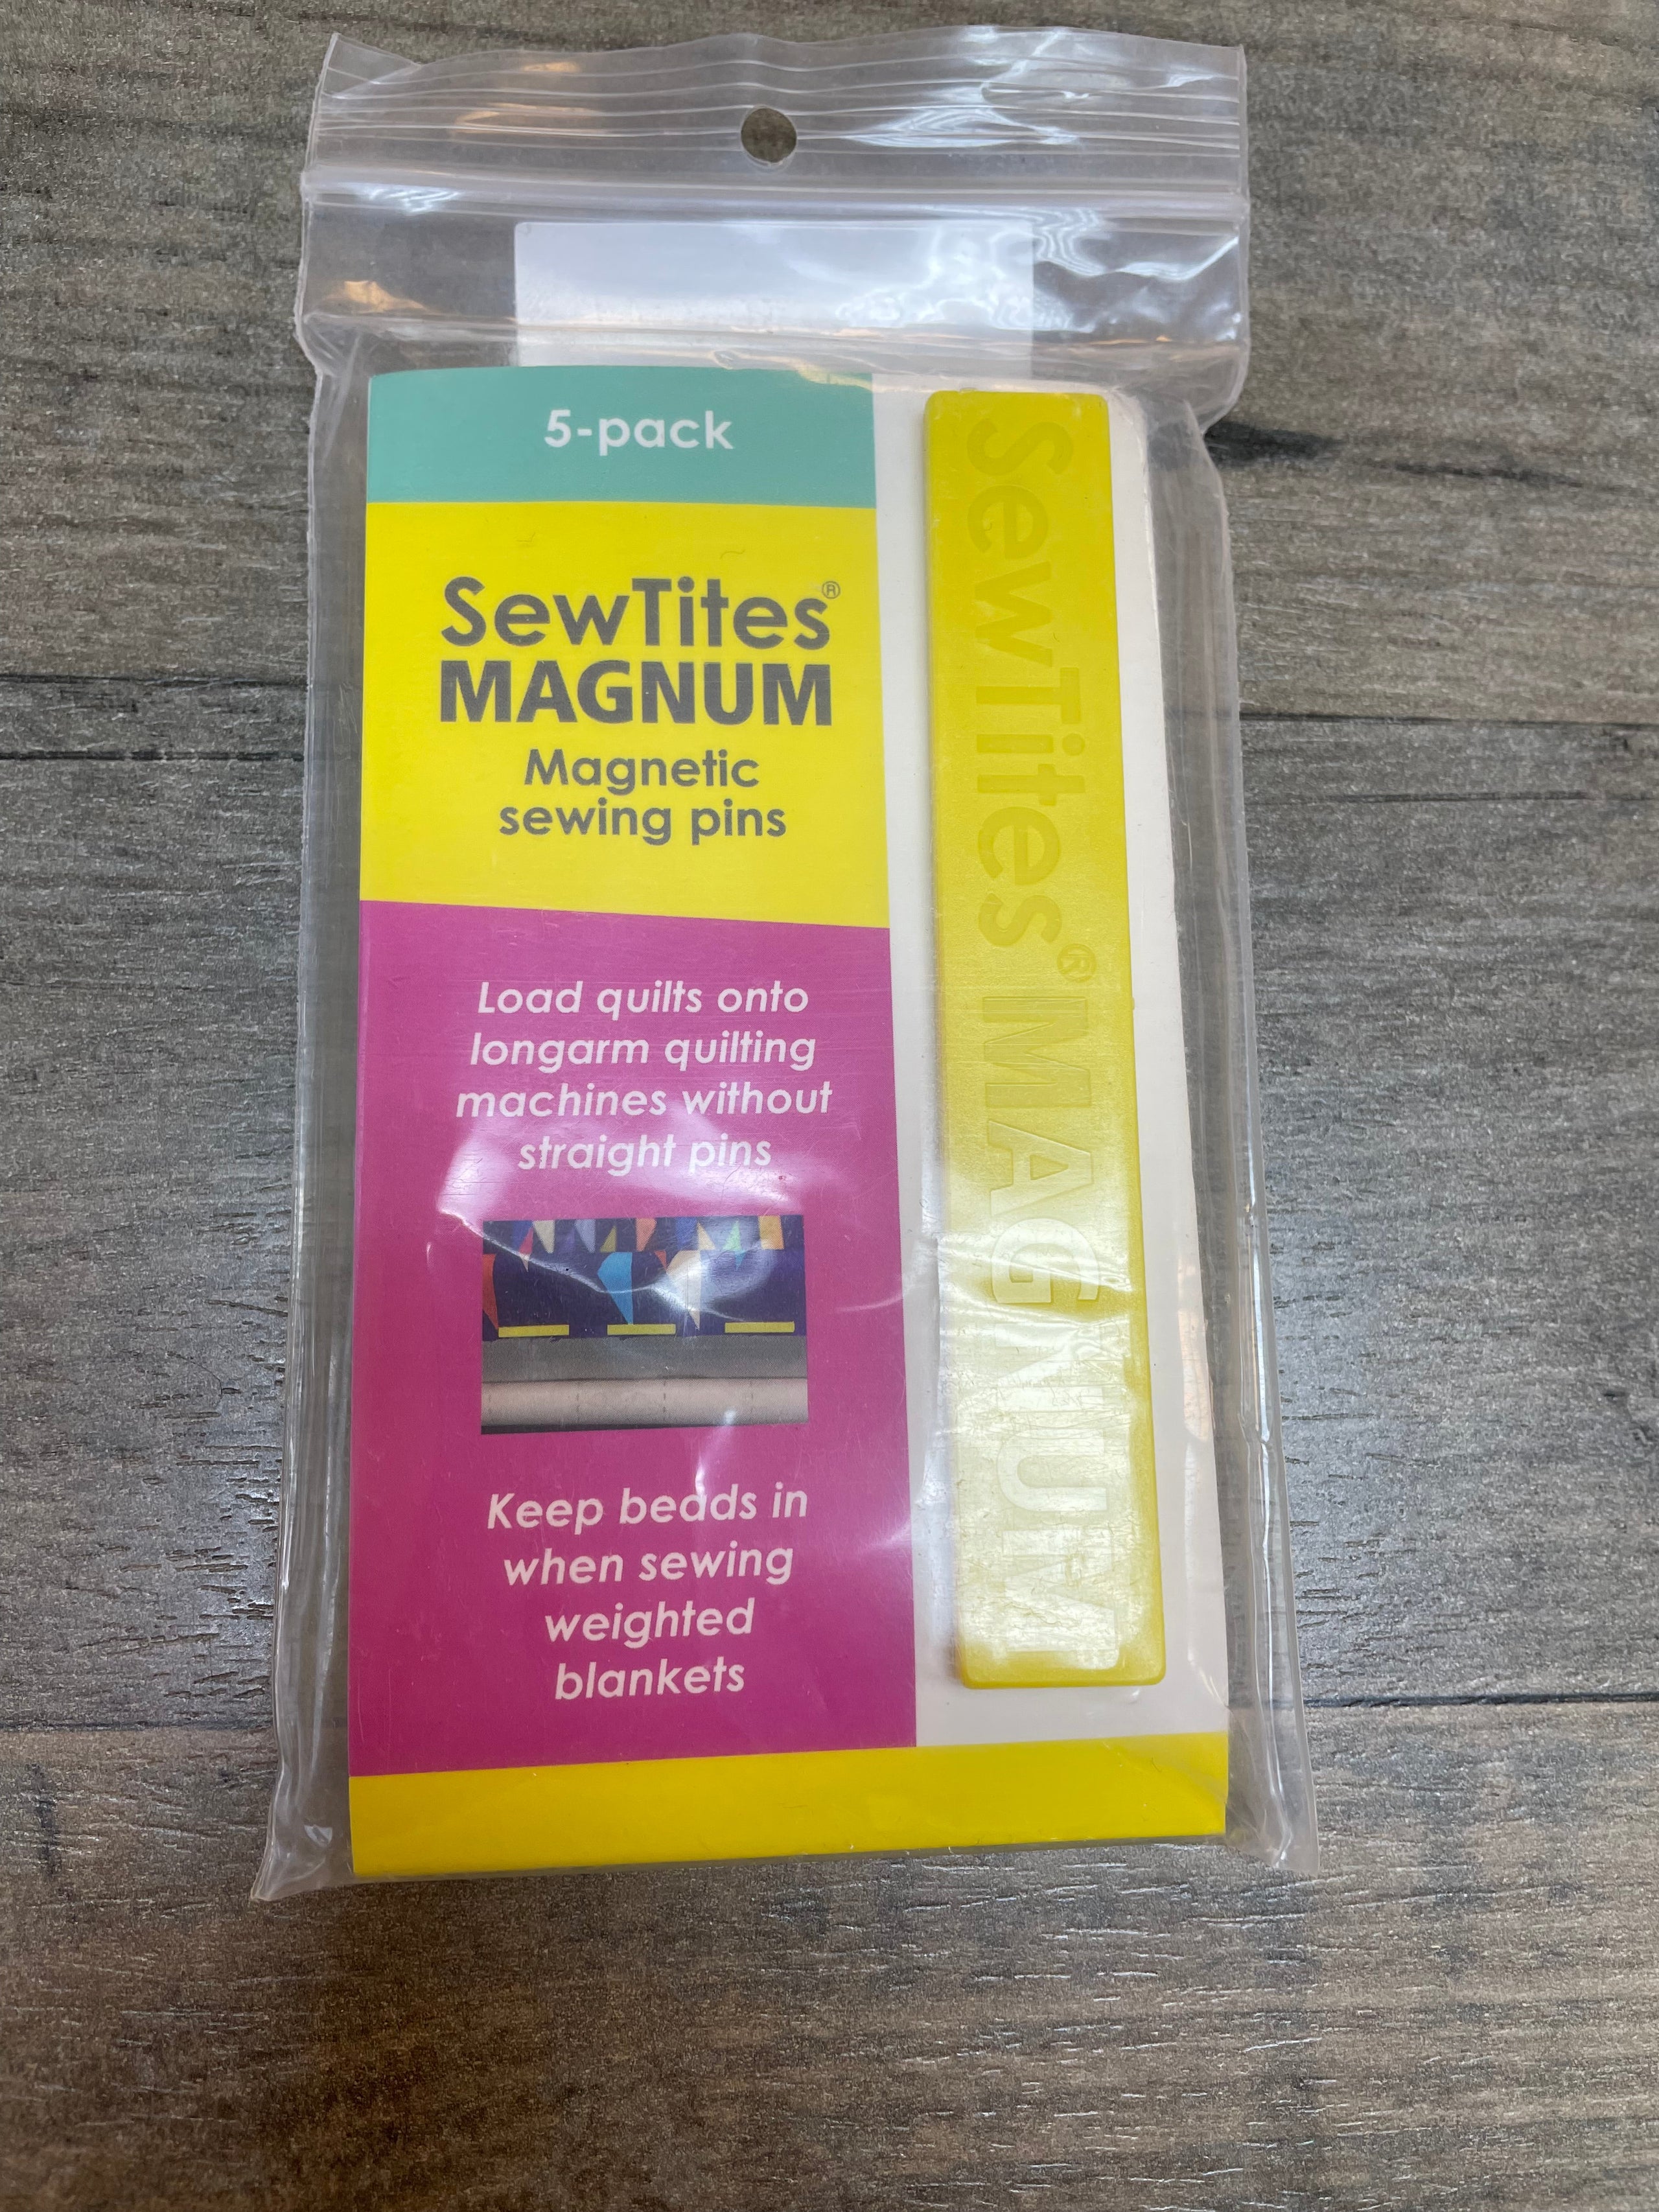 SewTites Magnum Magnetic Sewing Pins - 5 Pack